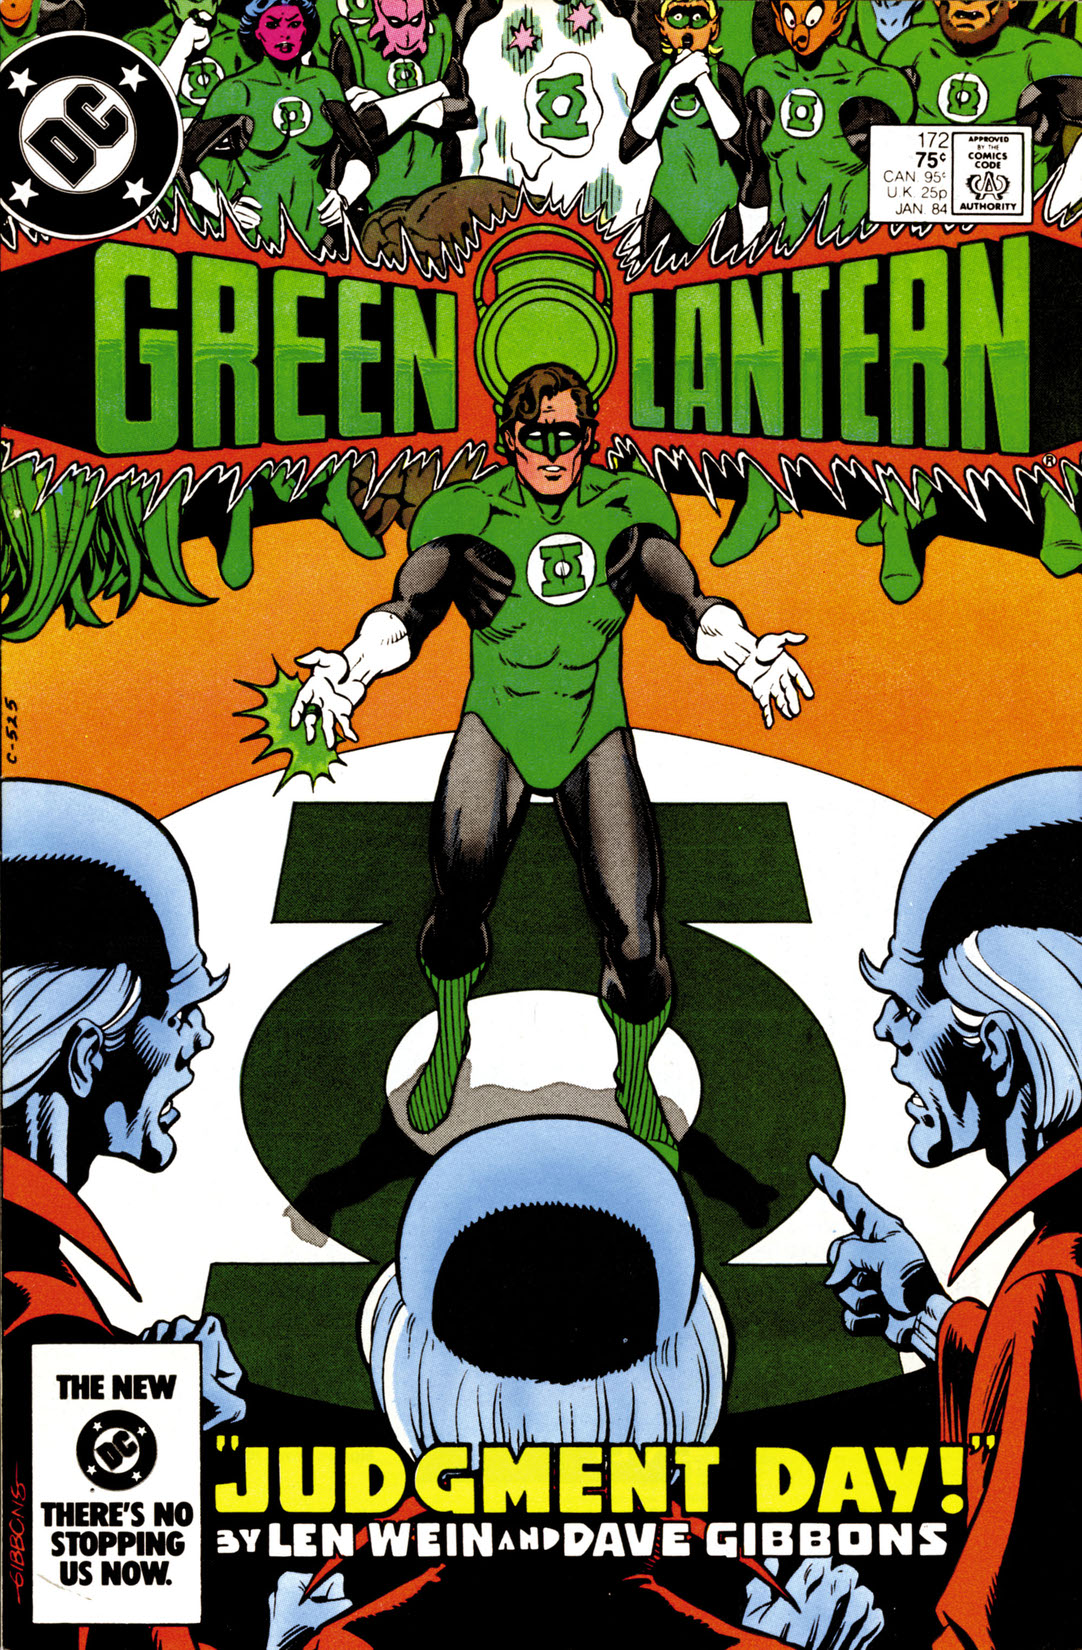 Green Lantern (1960-) #172 preview images